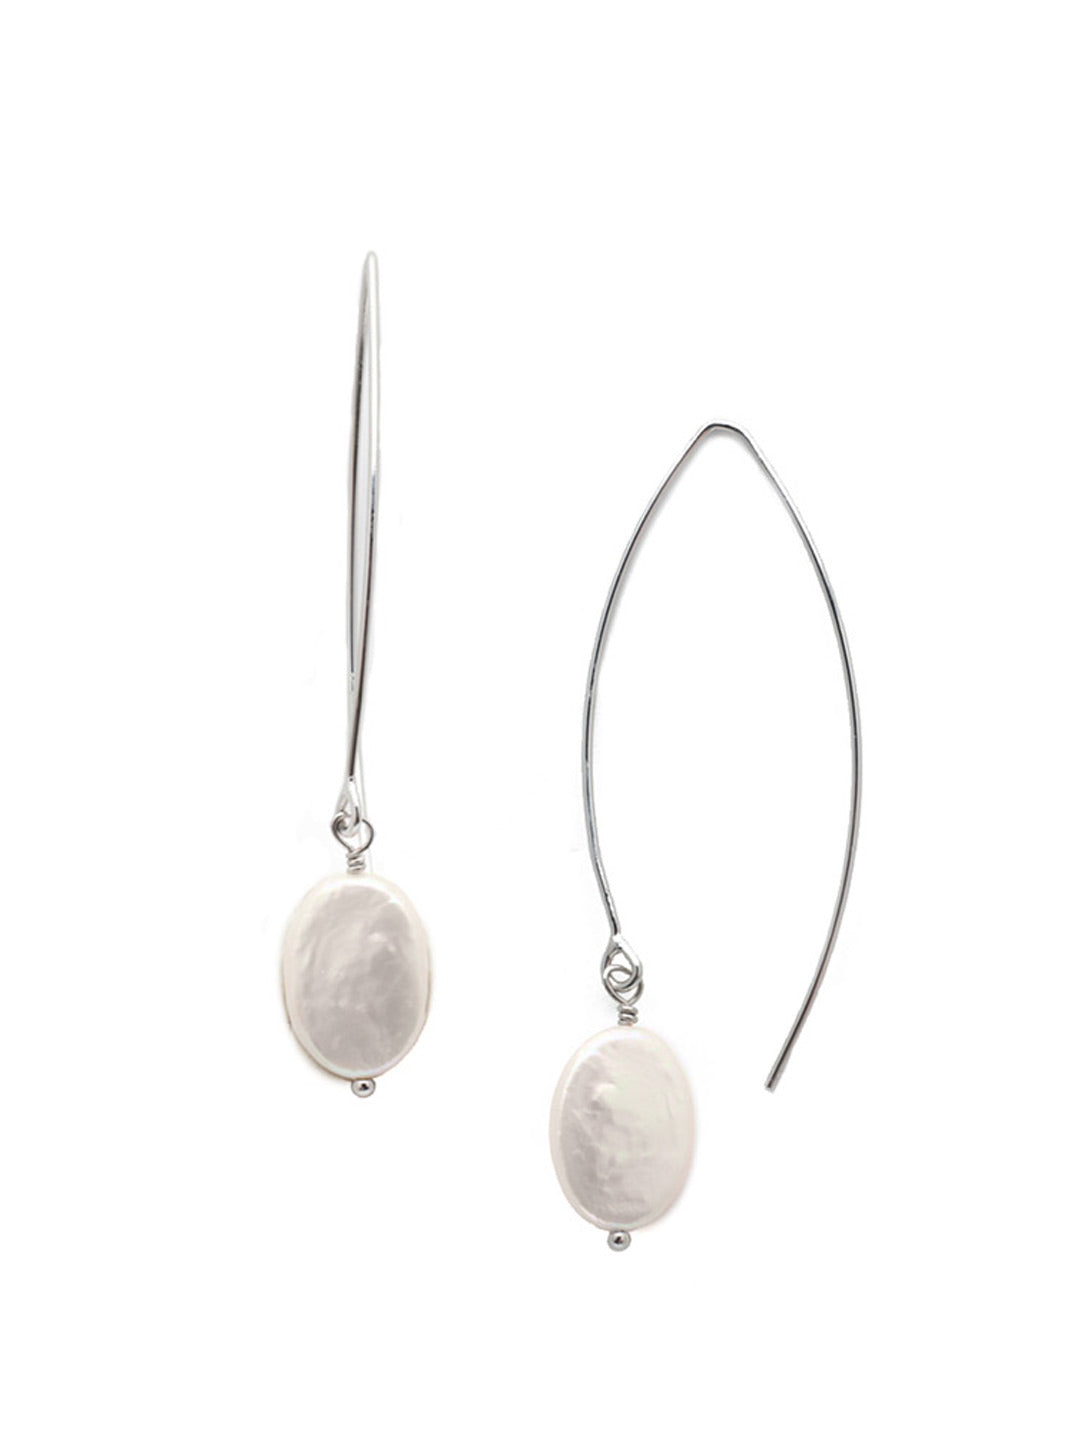 Finch Dangle Earrings - 4EES51RHMDP - <p>The Finch Dangle Earrings are proof-positive that sometimes less is more. Their unique slim metal base drips with a single freshwater pearl that's undeniably fashionable. From Sorrelli's Modern Pearl collection in our Palladium Silver-tone finish.</p>